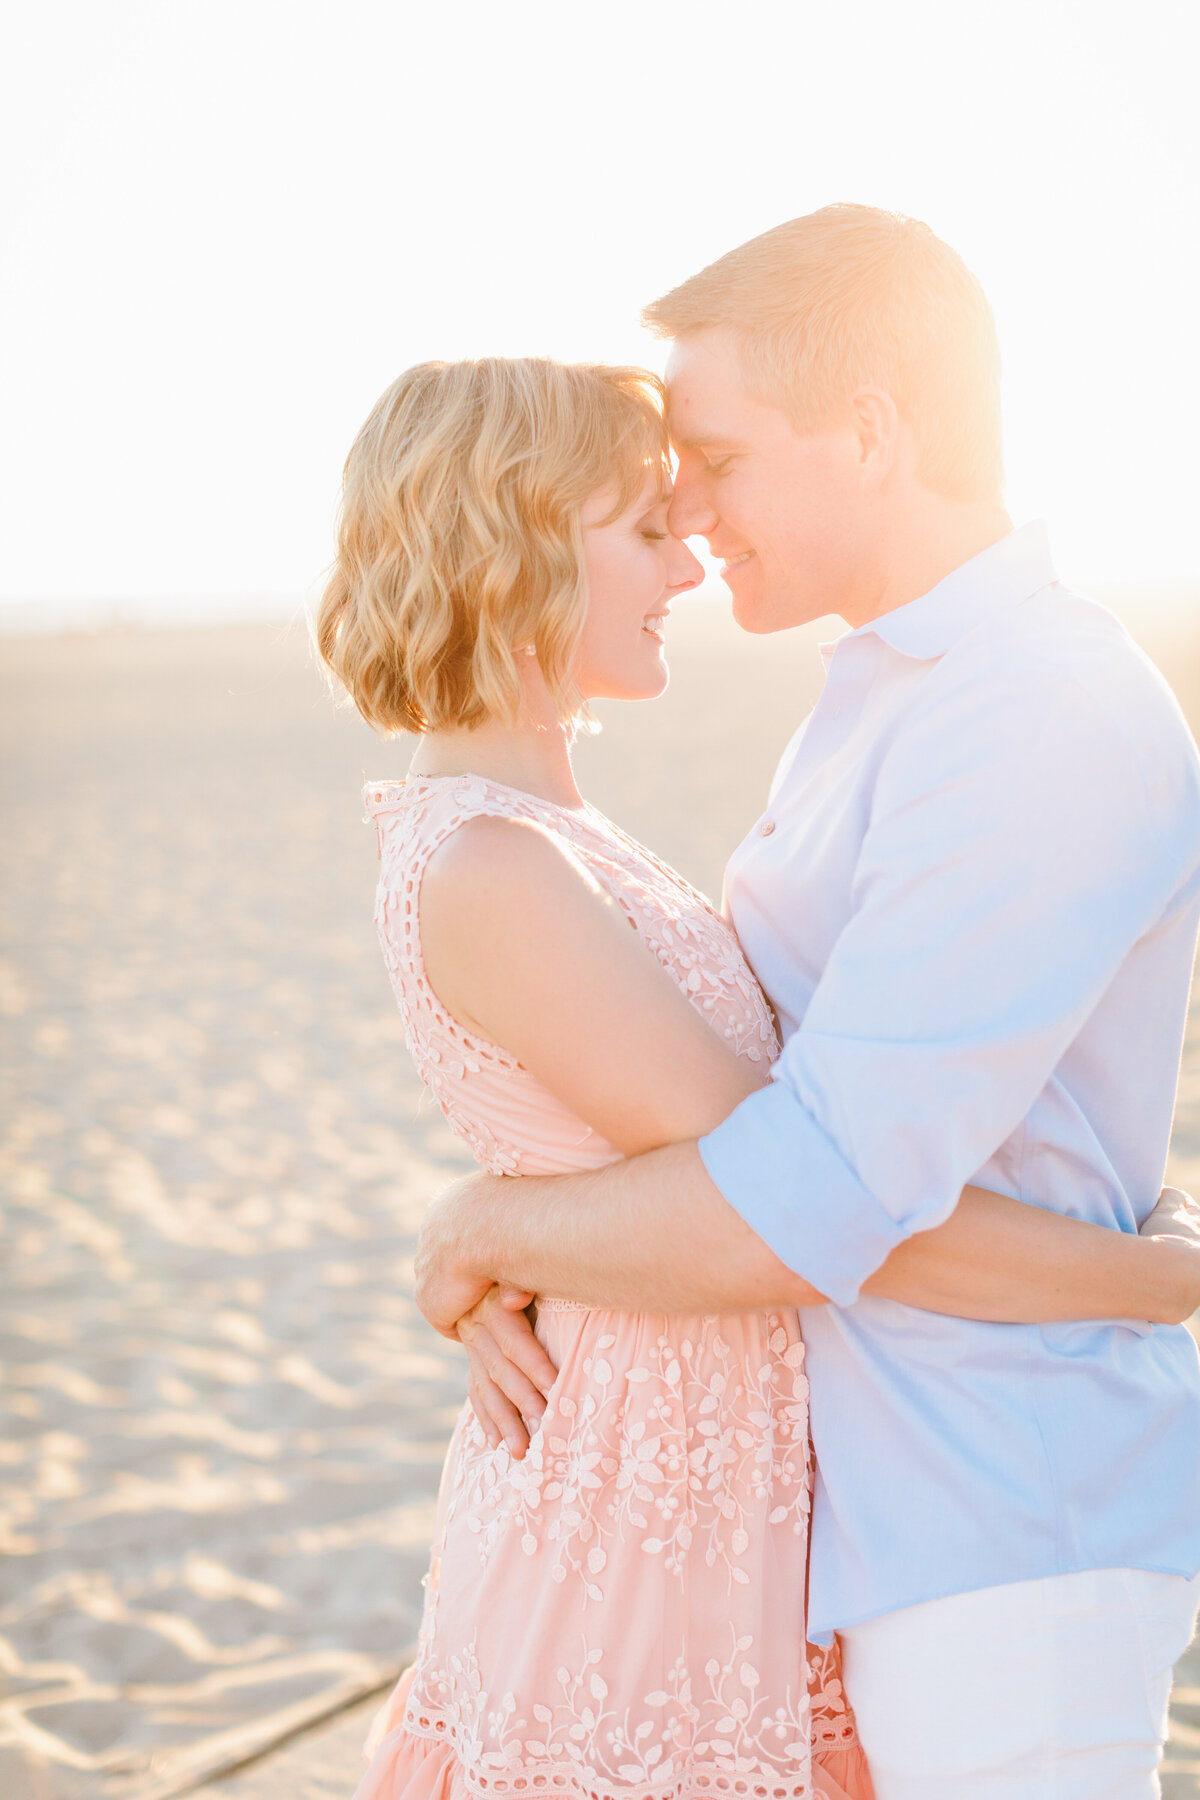 Best California and Texas Engagement Photographer-Jodee Debes Photography-67